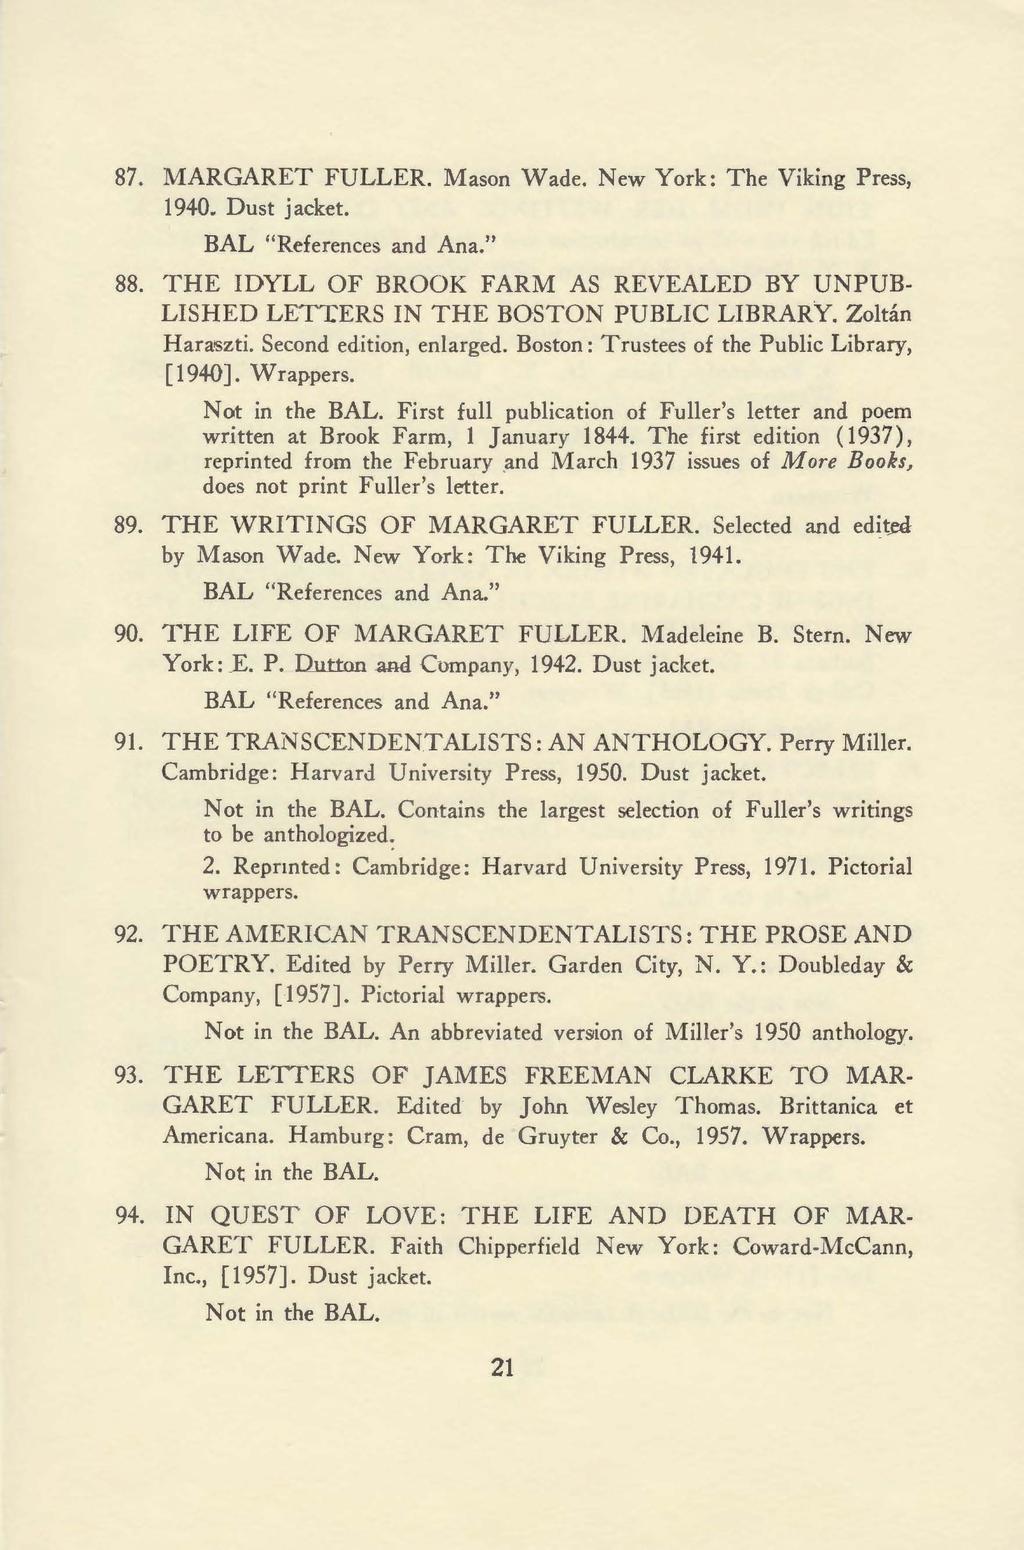 87. MARGARET FULLER. Mason Wade. New York: The Viking Press, 1940. Dust jacket. BAL "References and Ana." 88. THE IDYLL OF BROOK FARM AS REVEALED BY UNPUB LISHED LETTERS IN THE BOSTON PUBLIC LIBRARY.